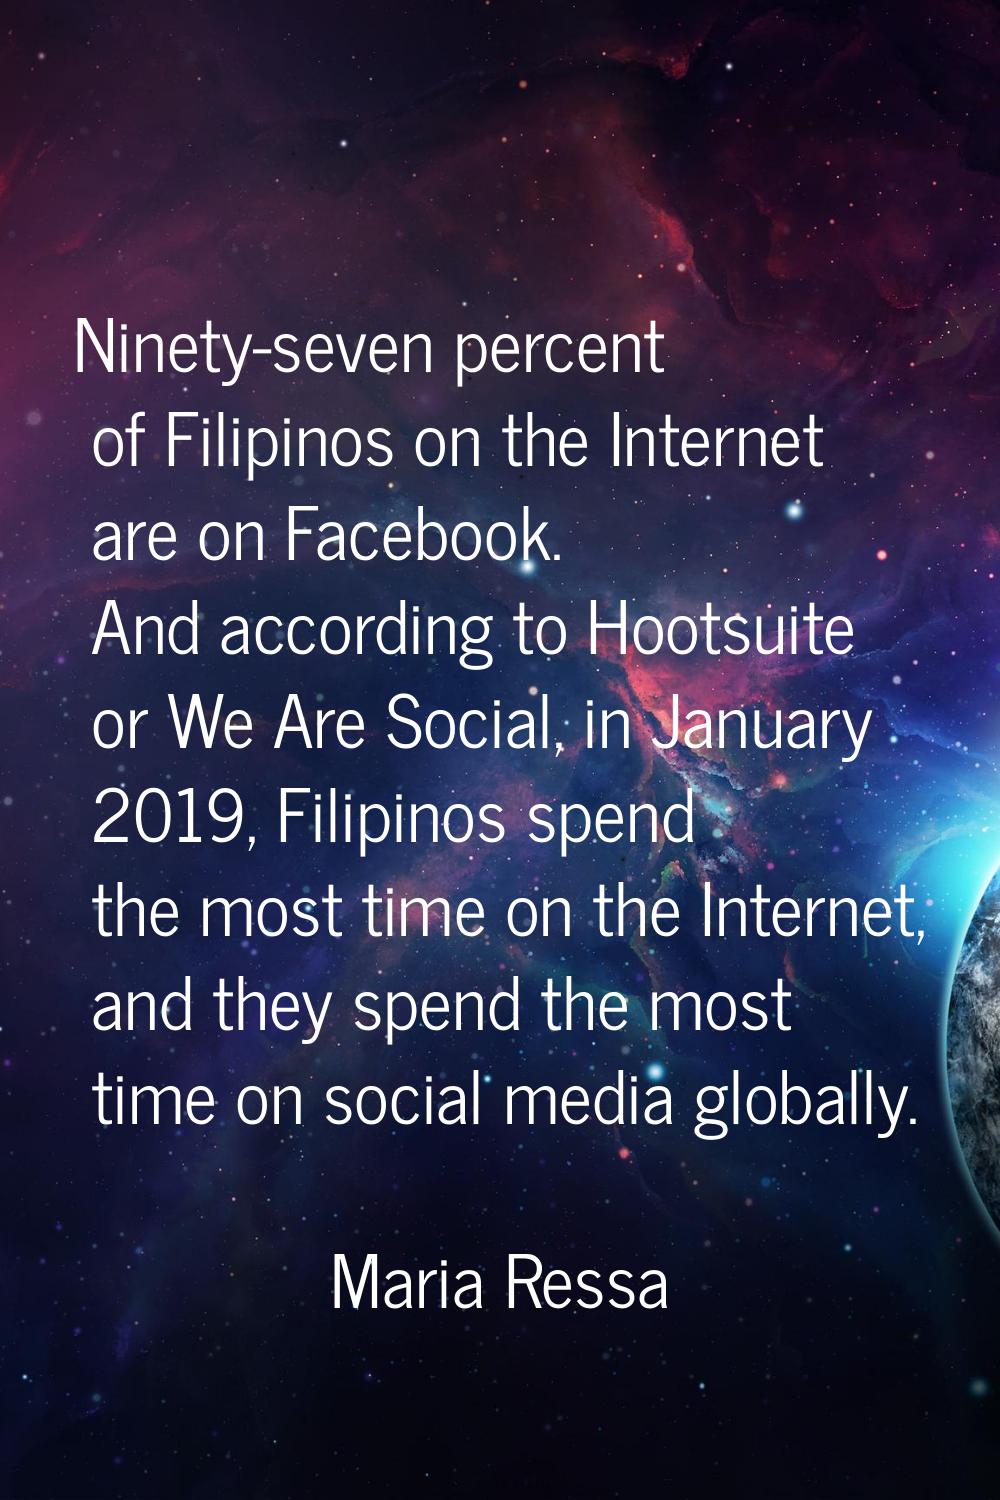 Ninety-seven percent of Filipinos on the Internet are on Facebook. And according to Hootsuite or We